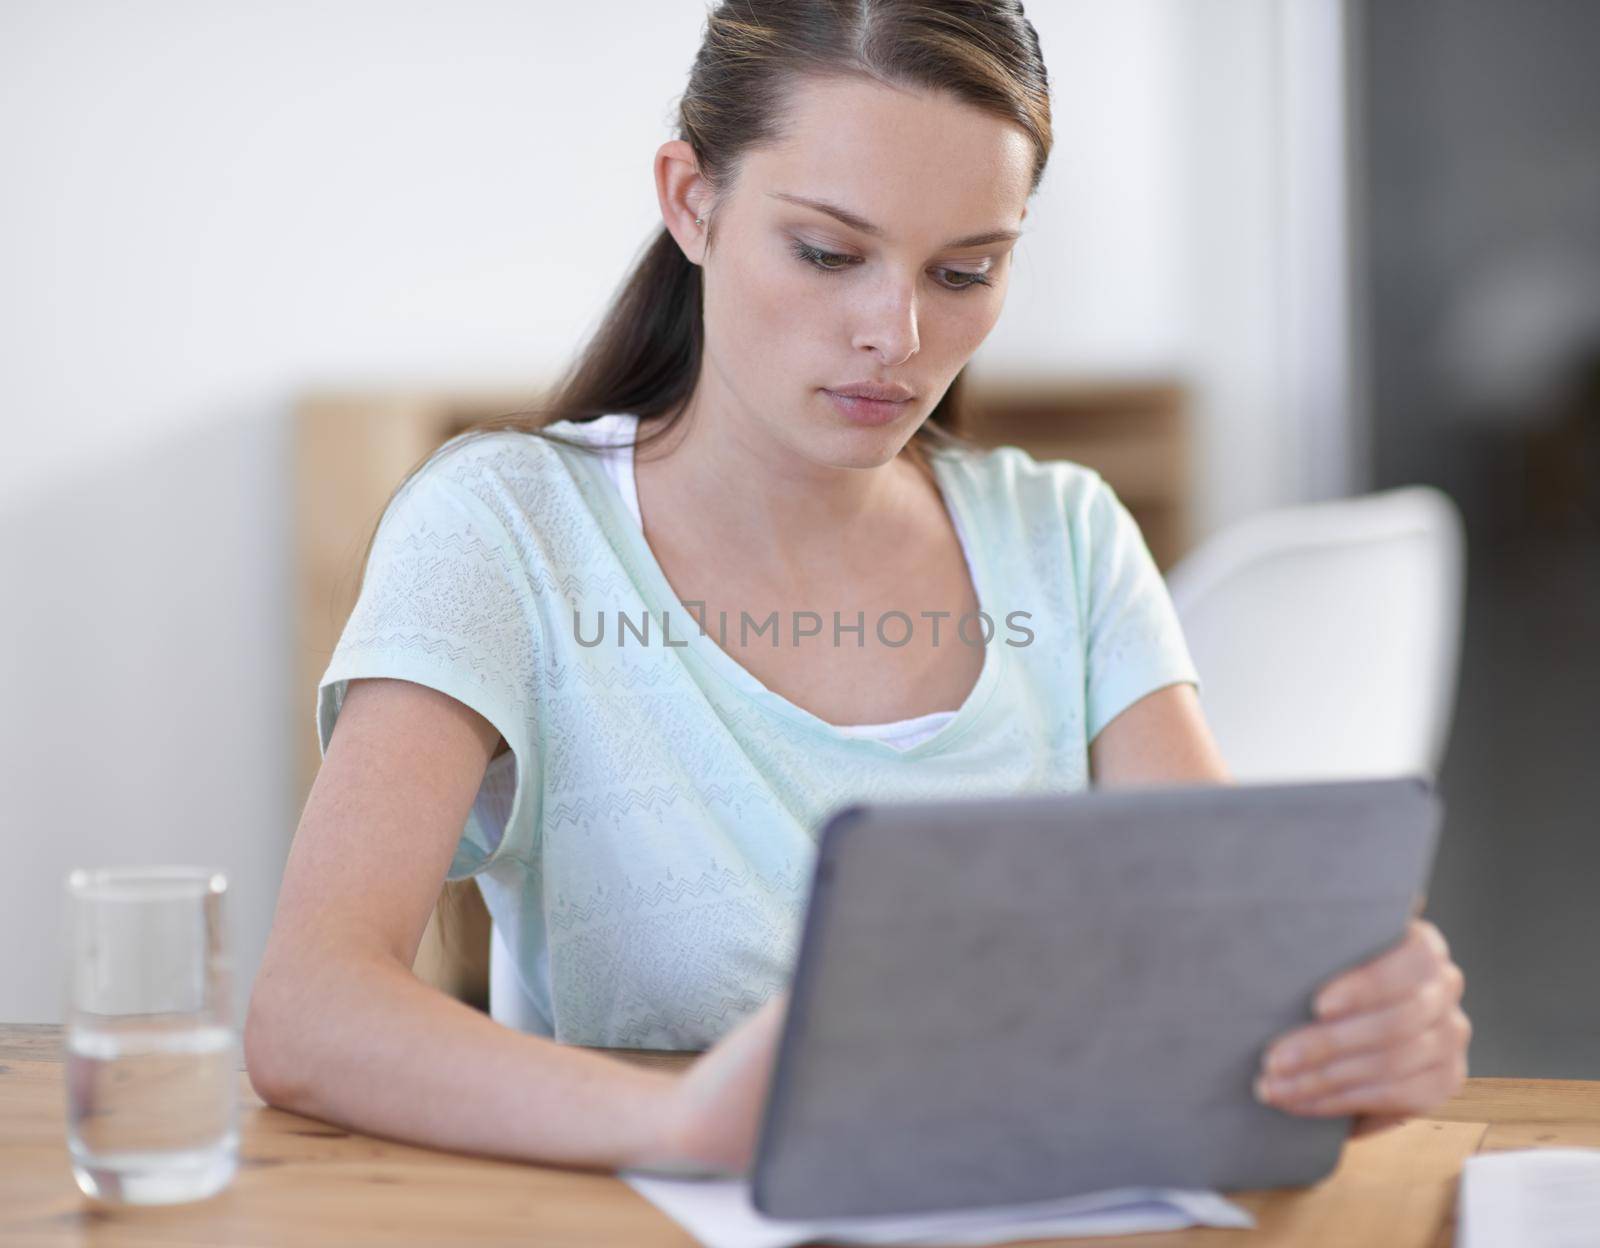 Using technology to get the job done. an attractive young businesswoman using a wireless device